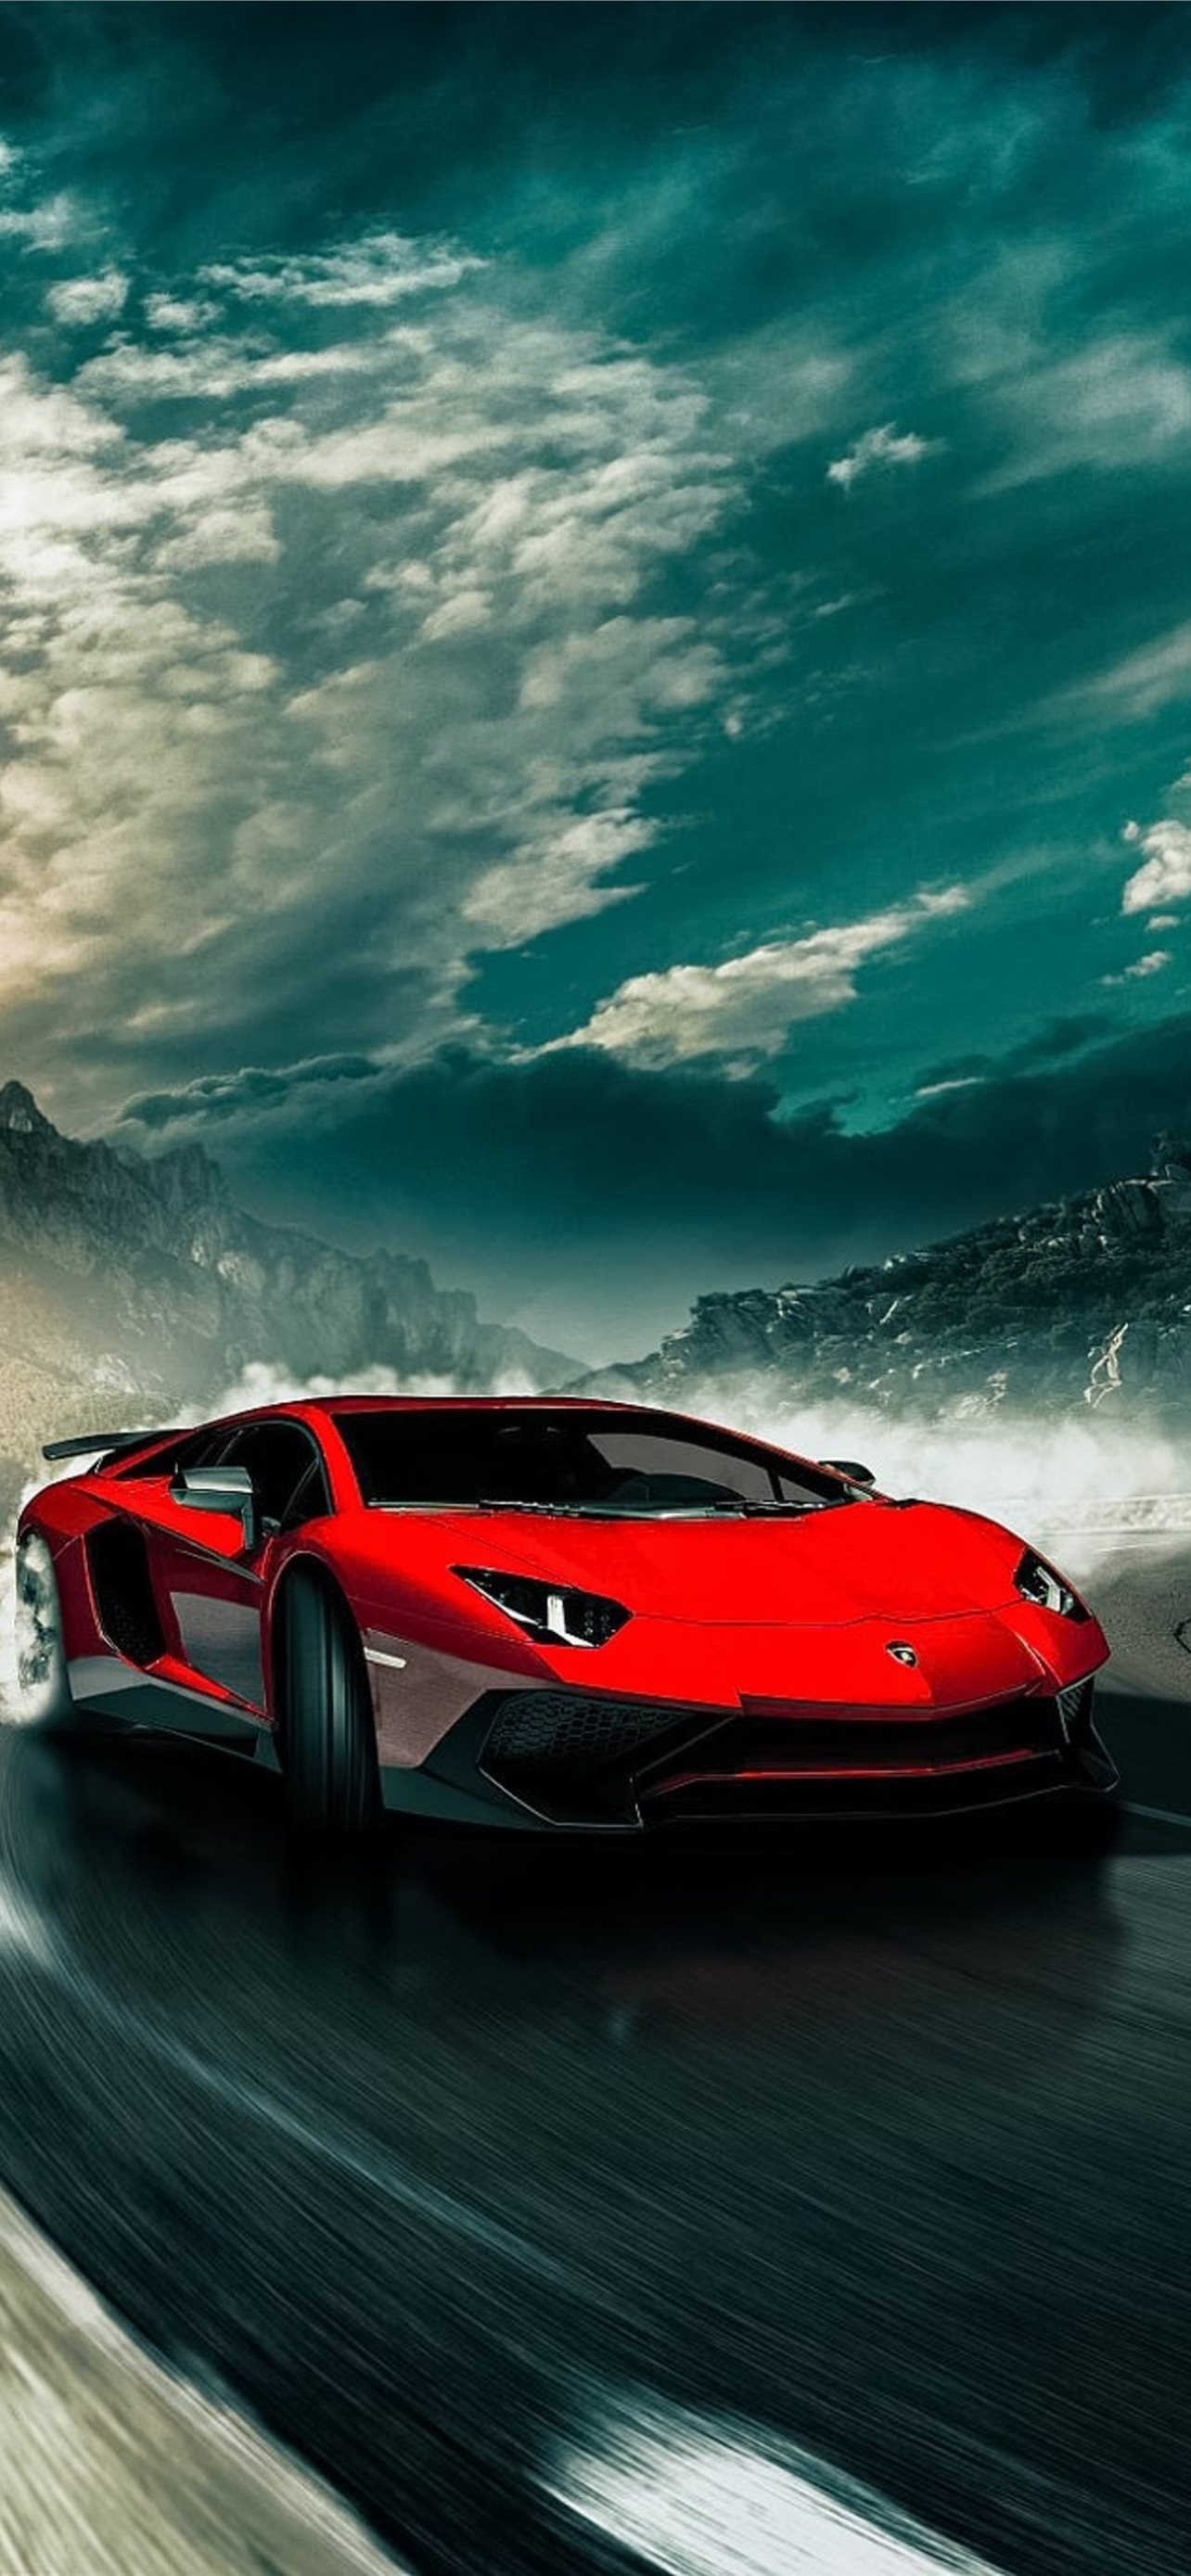 Lambo Fire IPhone Wallpaper HD  IPhone Wallpapers  iPhone Wallpapers